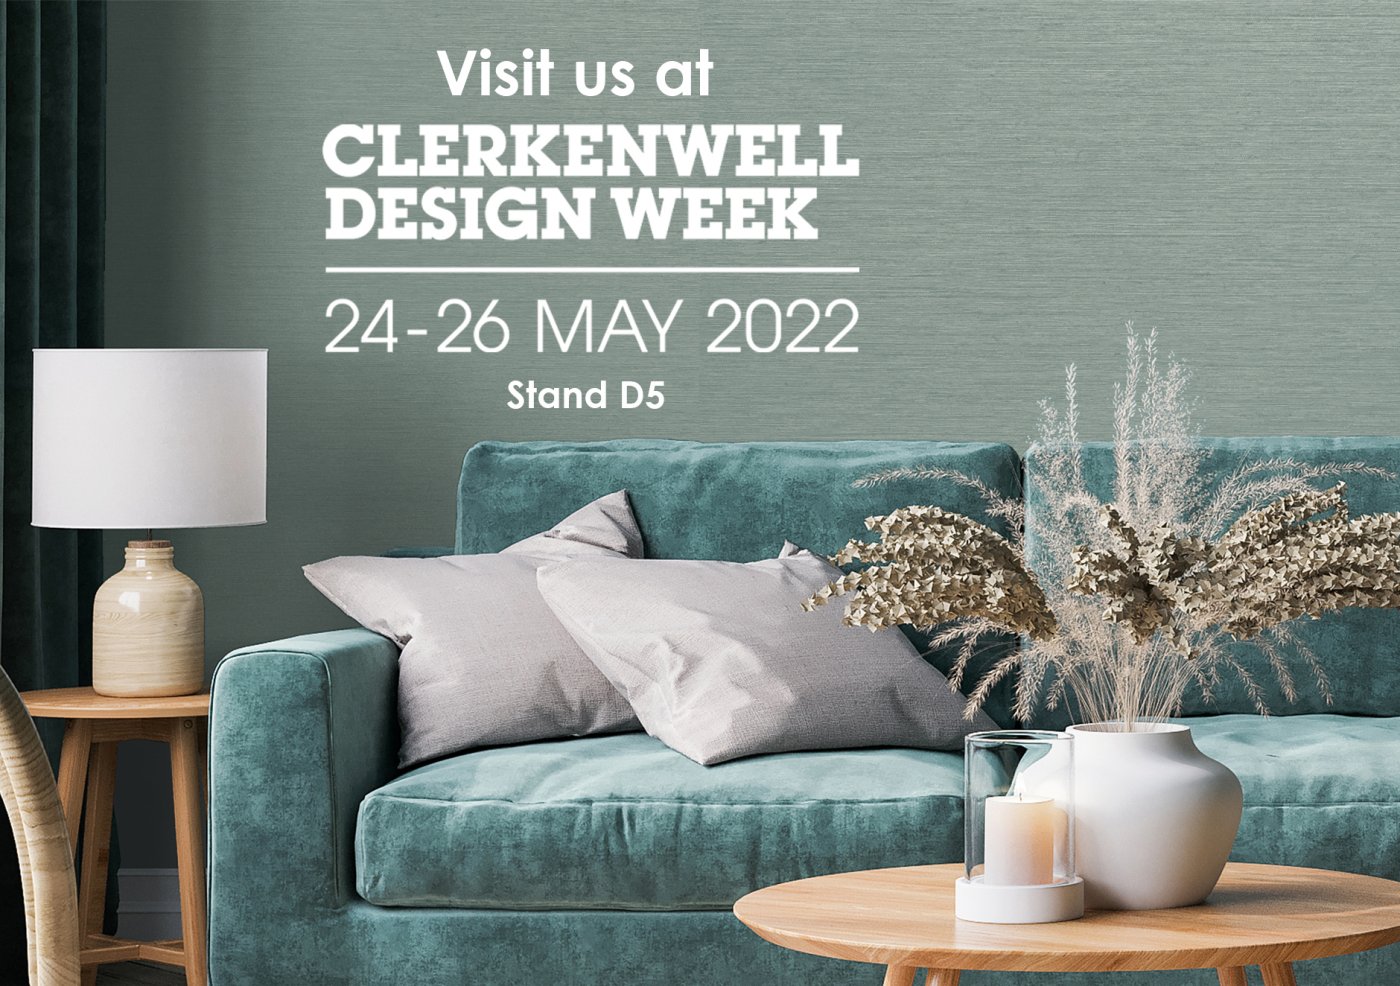 Trending new wallcovering designs to feature at Clerkenwell Design Week